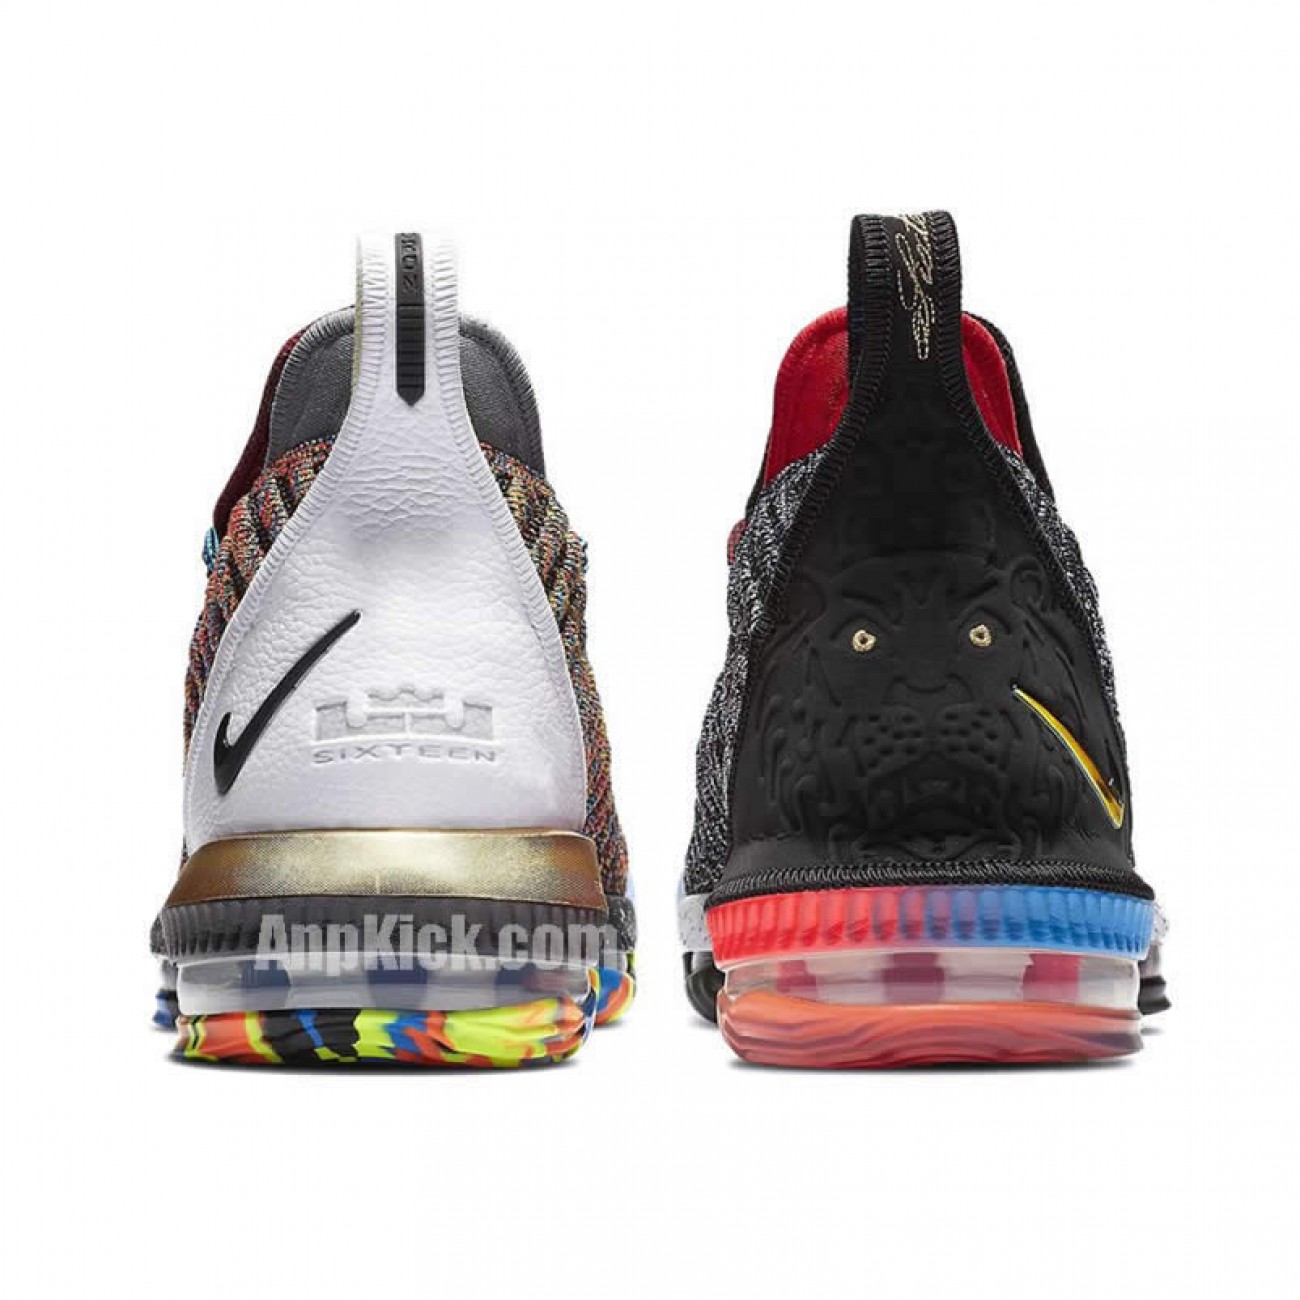 Nike Lebron 16 LMTD Multicolor "What The" 1 Thru 5 For Sale BQ6582-900